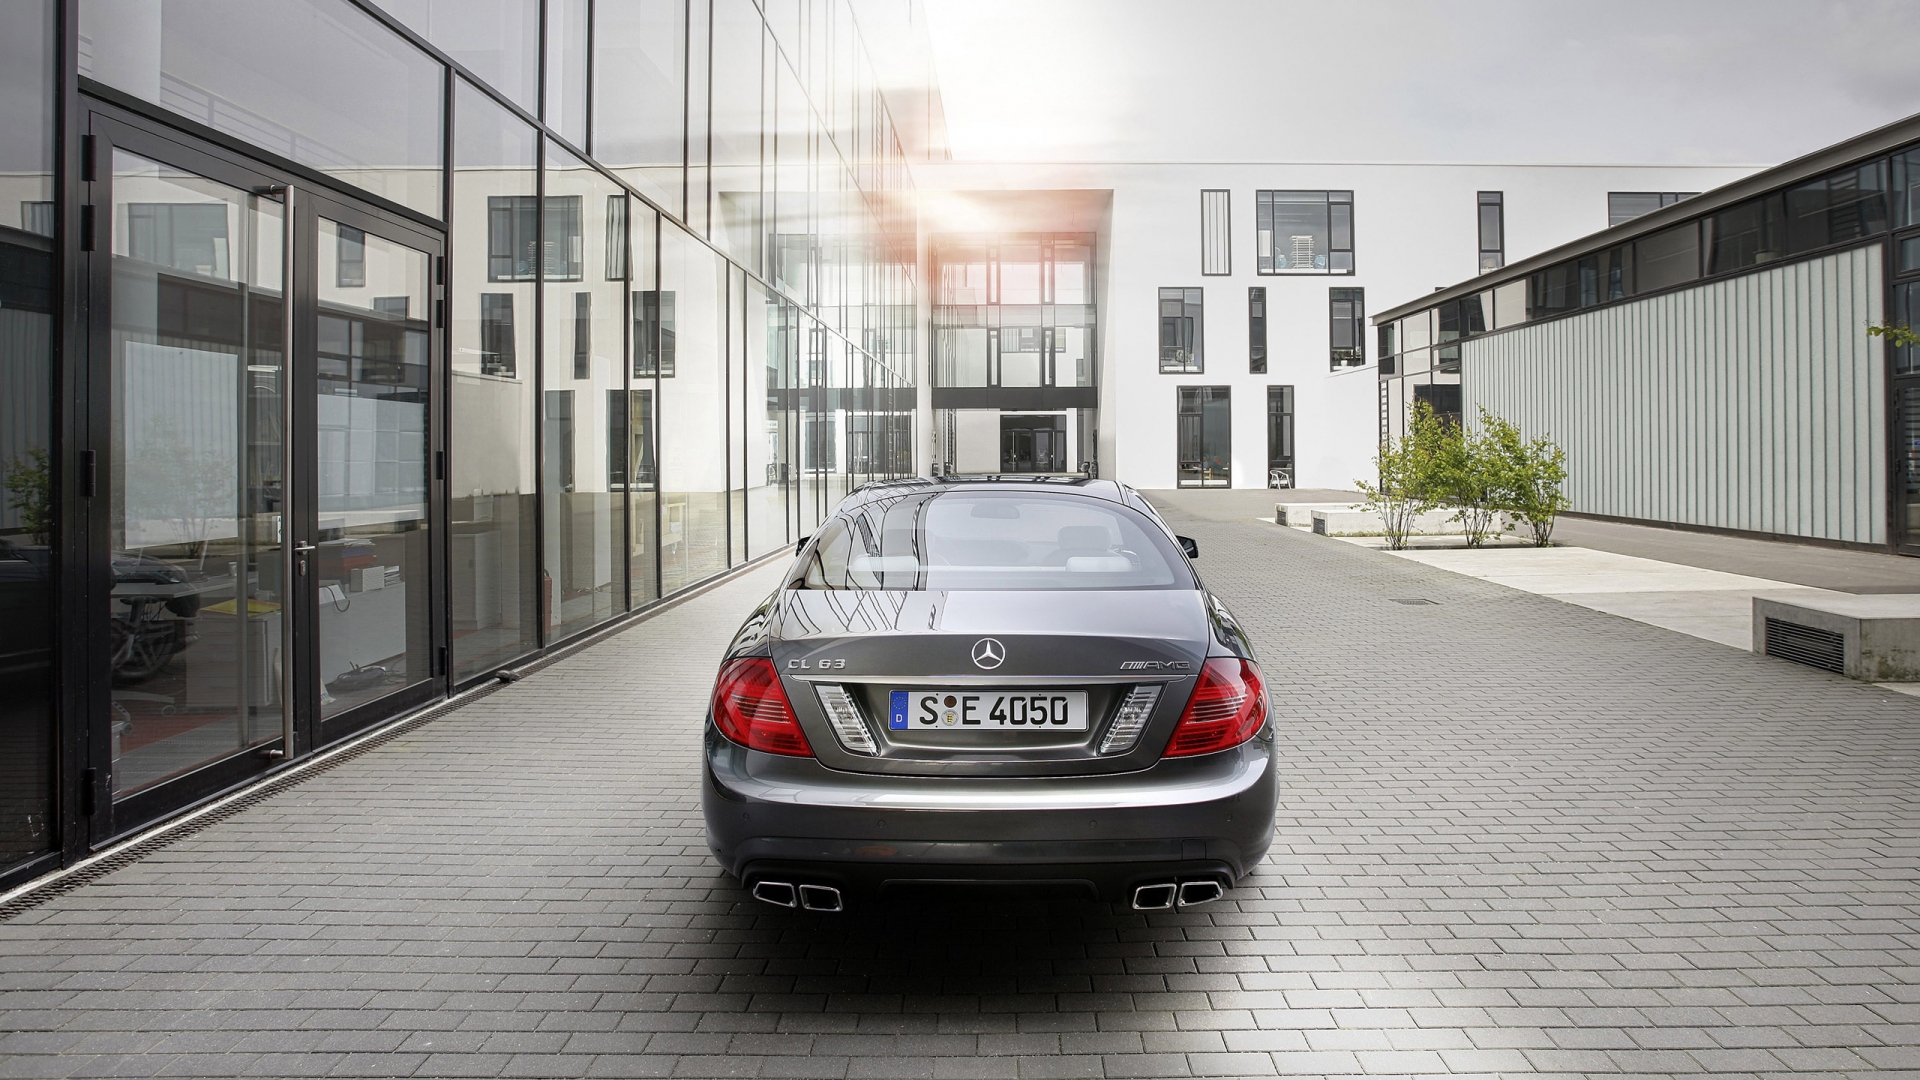 Mercedes CL63 AMG 2011 Rear for 1920 x 1080 HDTV 1080p resolution